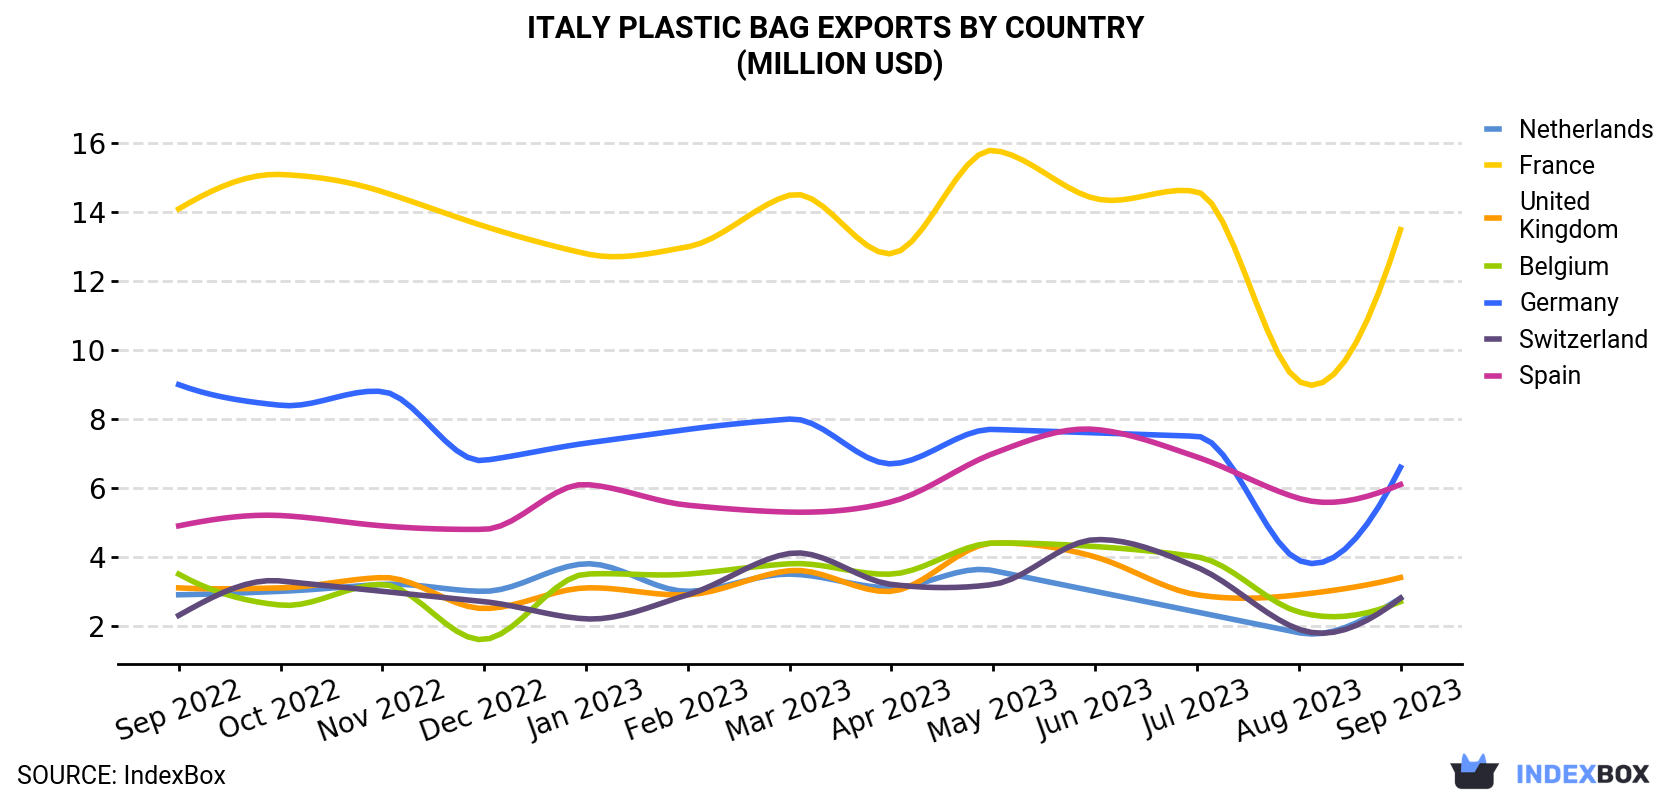 Italy Plastic Bag Exports By Country (Million USD)